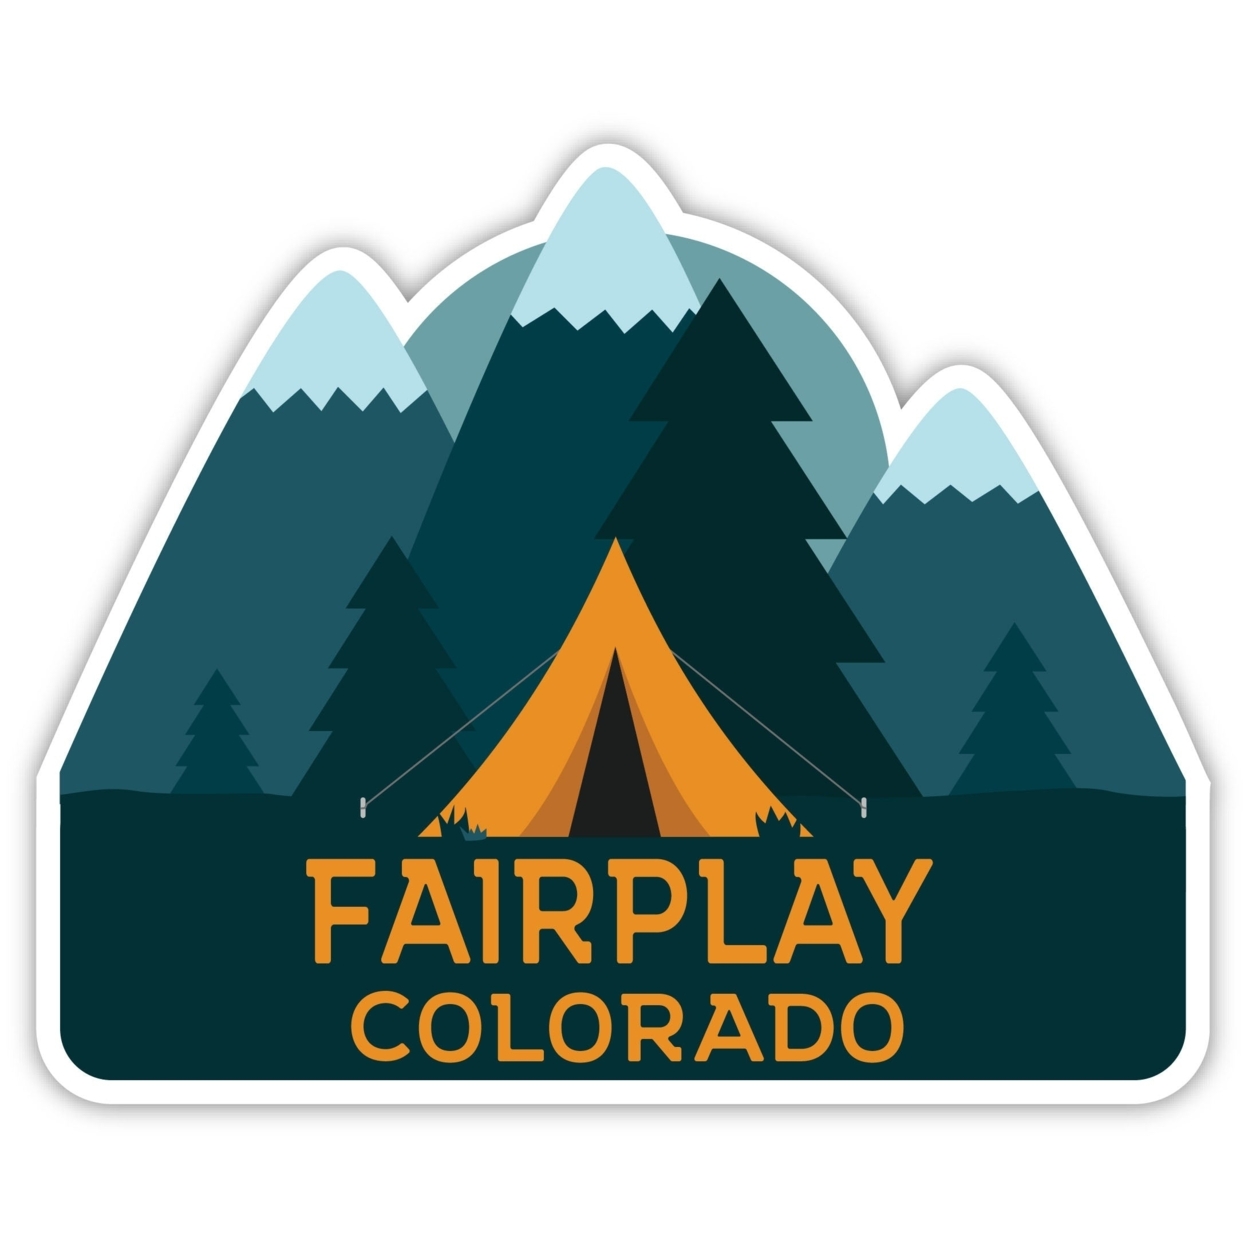 Fairplay Colorado Souvenir Decorative Stickers (Choose Theme And Size) - 4-Pack, 4-Inch, Tent